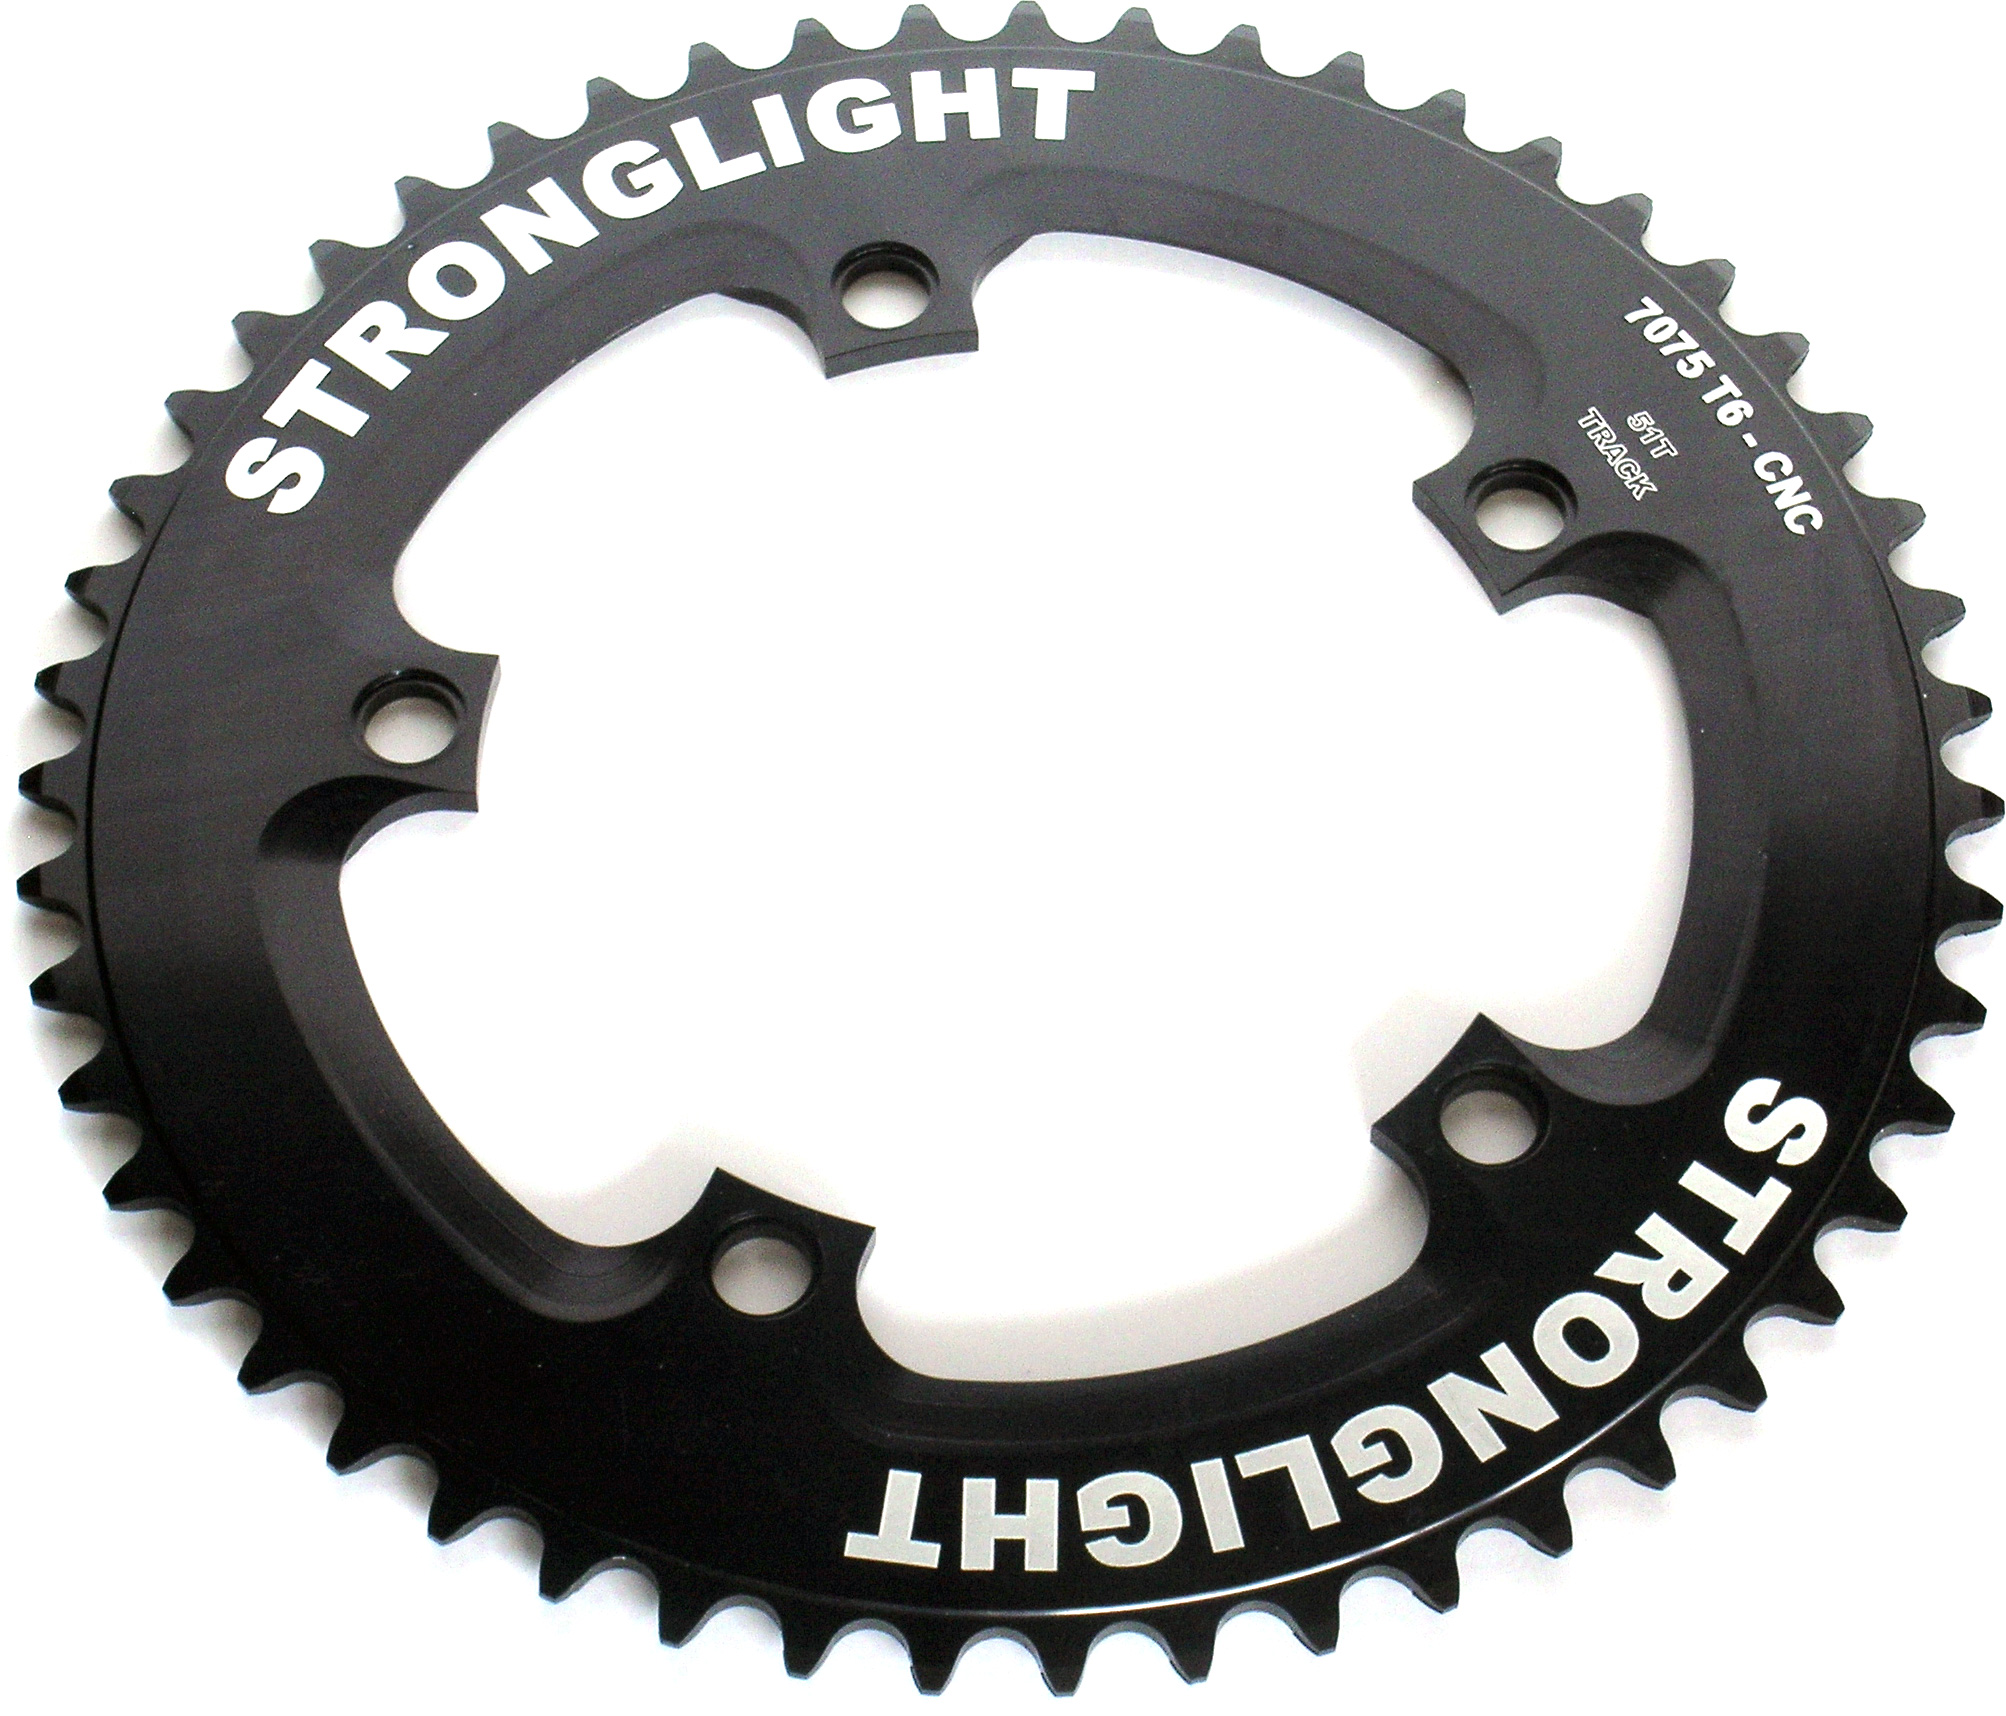 RT130Z53 Stronglight Black 53T 5-Arm/130mm Track Chainring